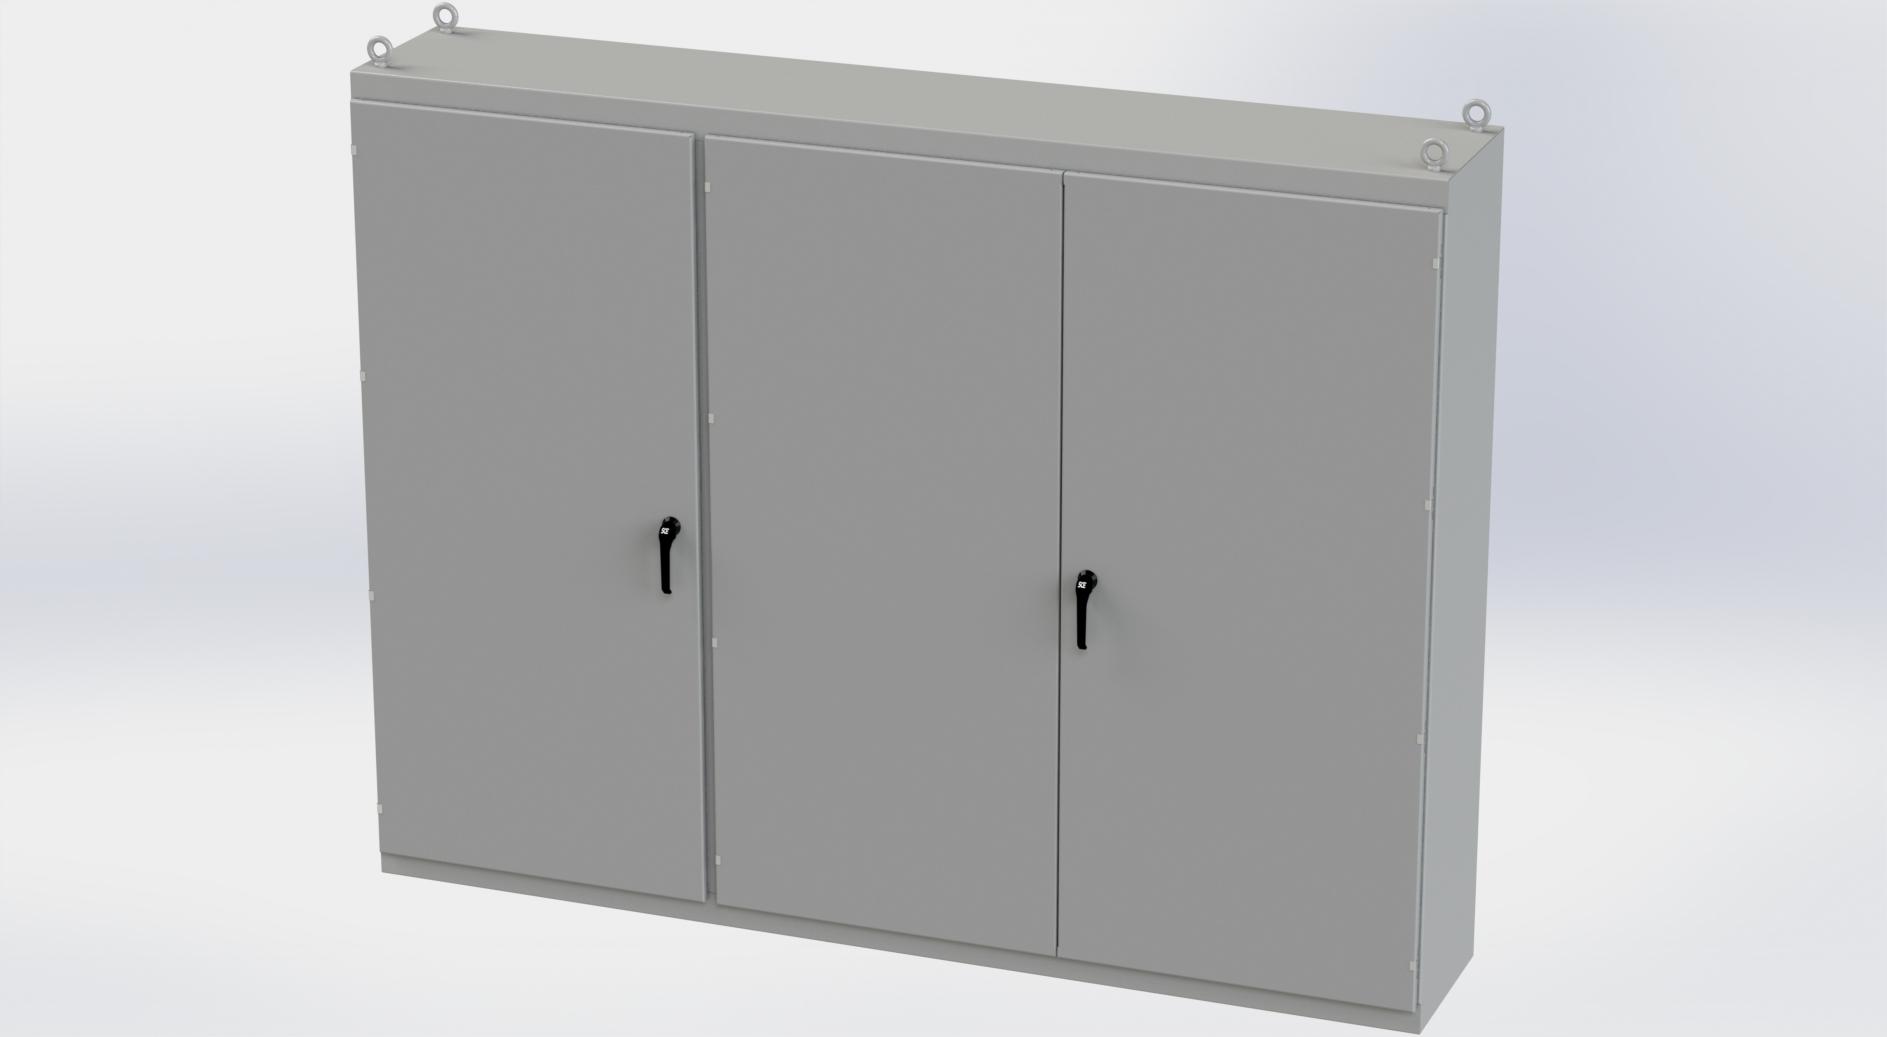 Saginaw Control SCE-86M3E20 Enclosure, Multi-Door, Height:86.00", Width:112.00", Depth:20.00", ANSI-61 gray powder coating inside and out. Sub-panels are powder coated white.